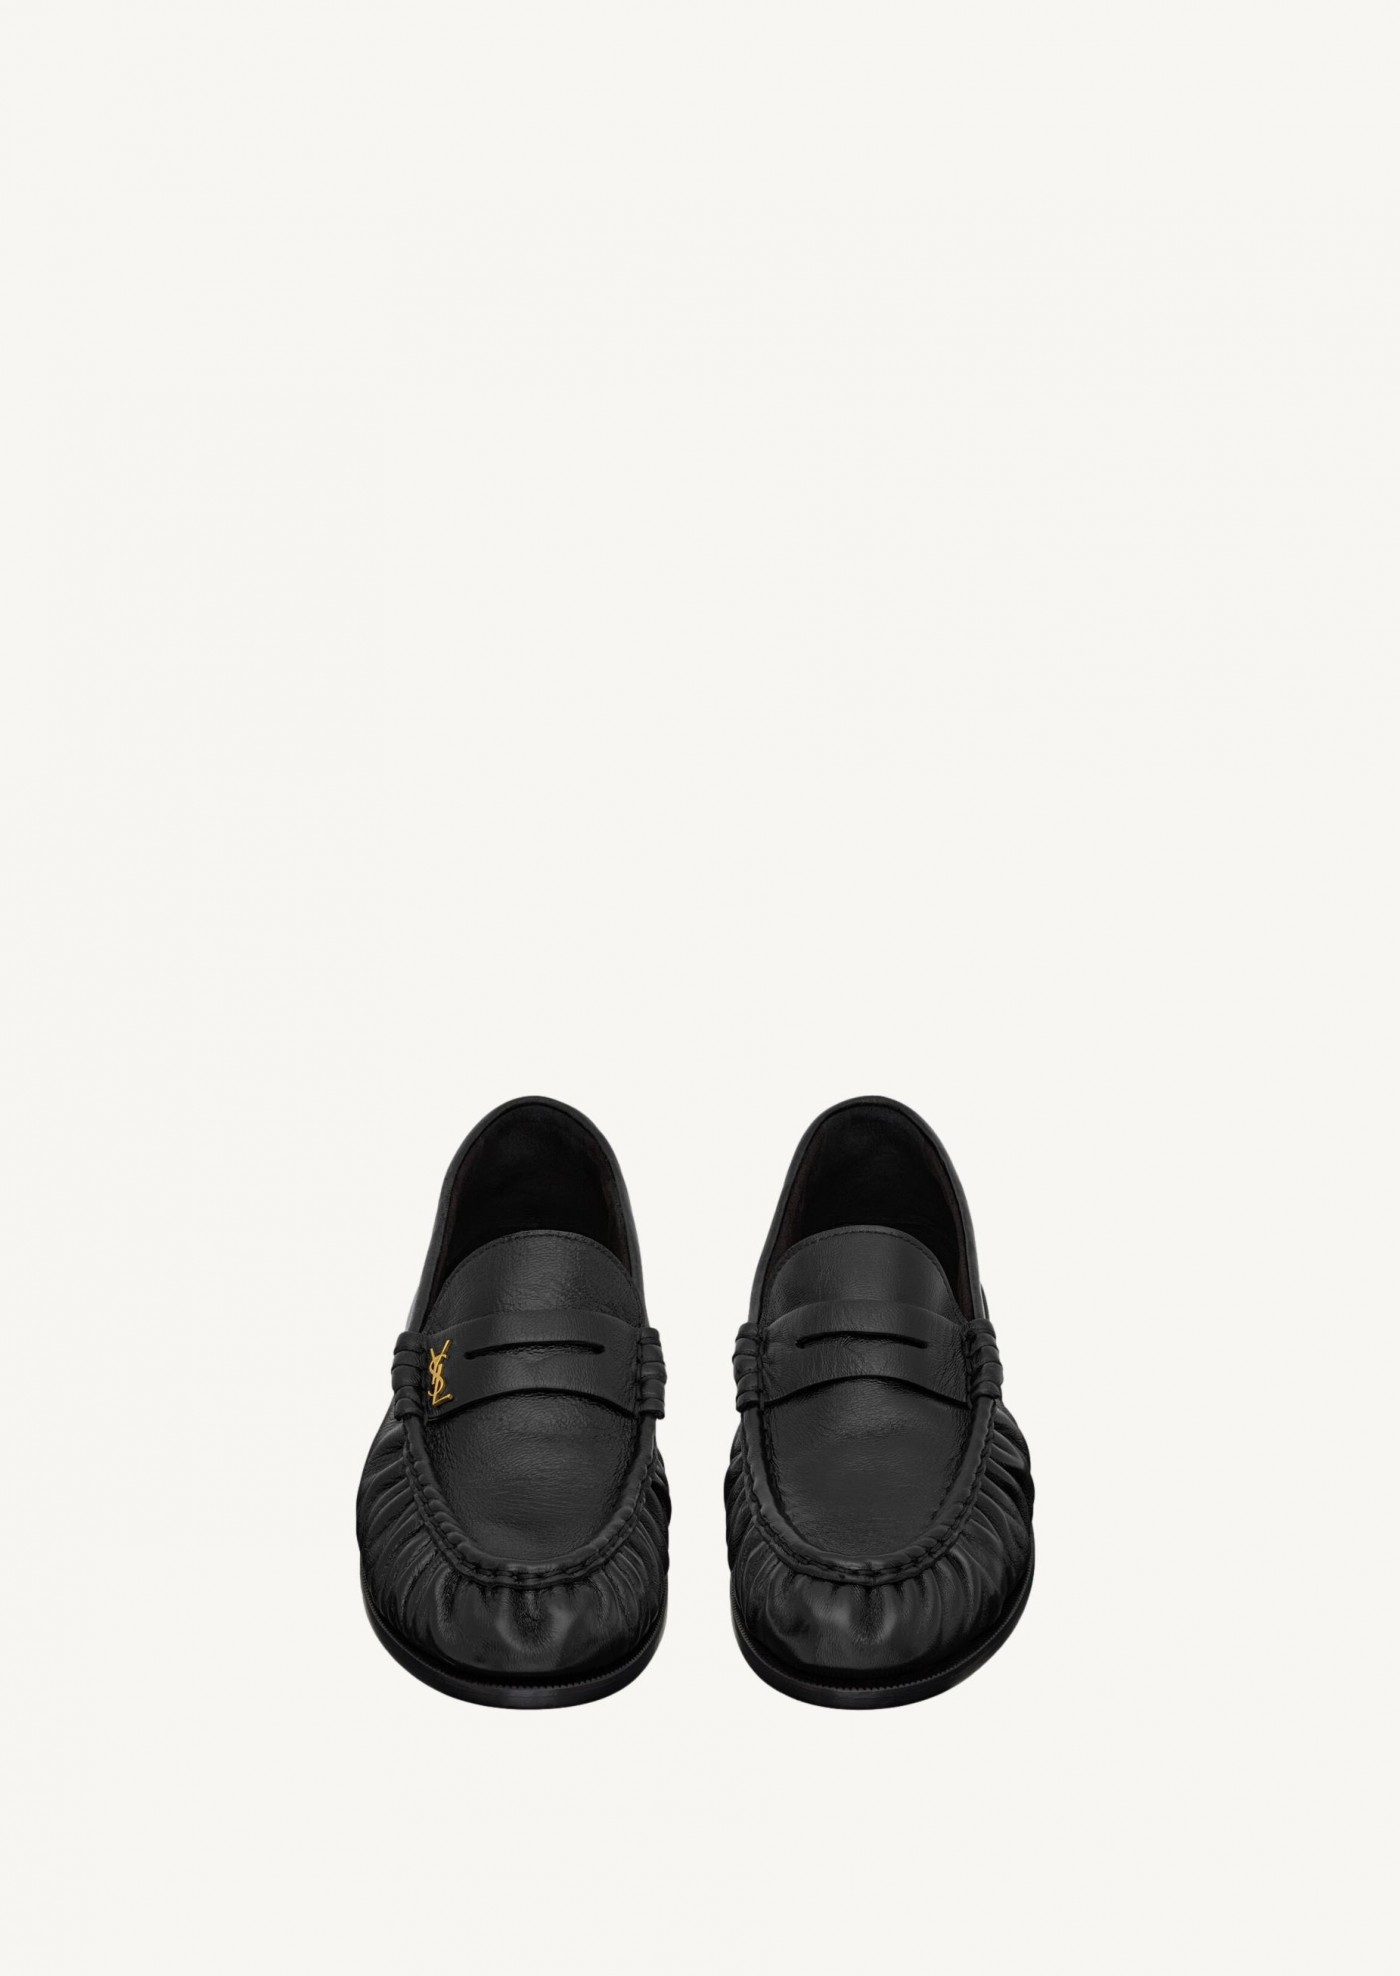 Black shiny pleated leather loafers